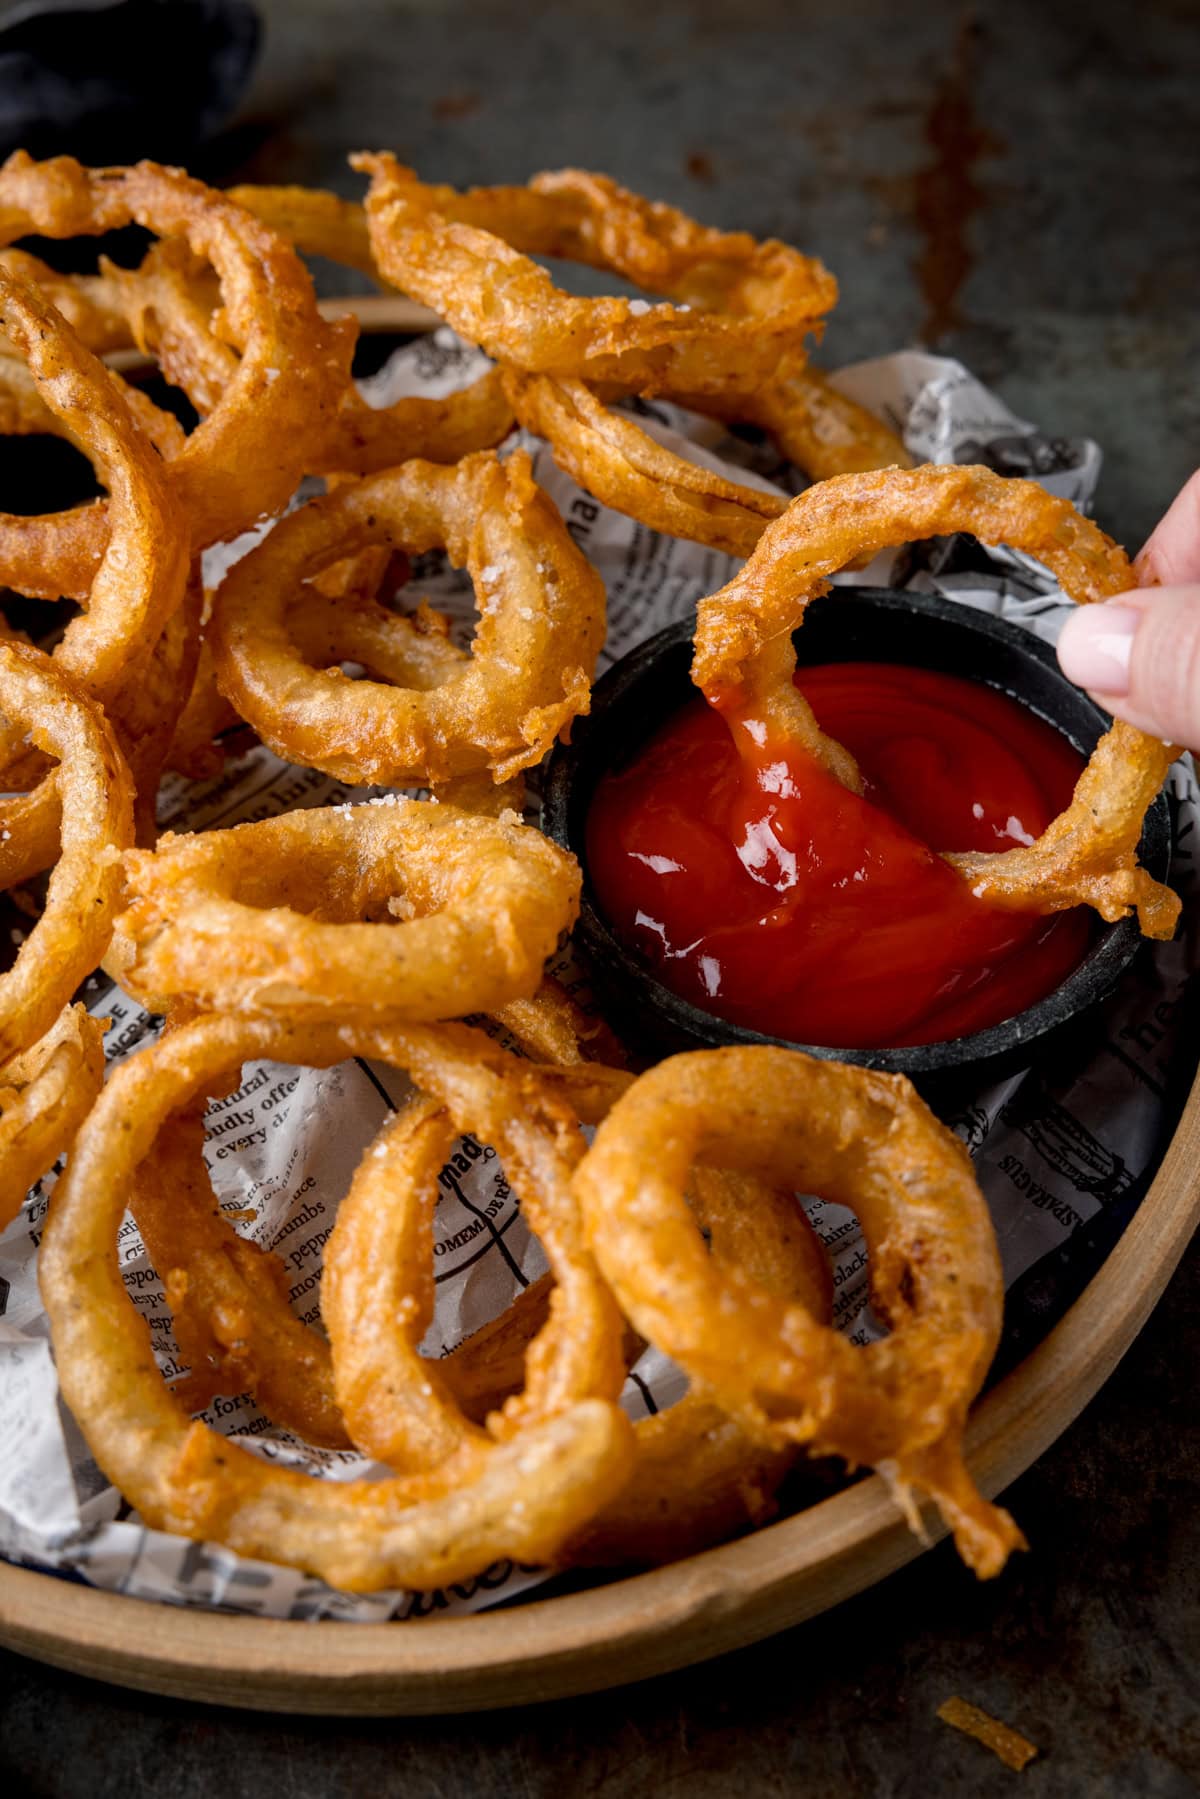 A tall image of Fried Onion Rings. The onion rings are set on a brown plate, lined with black and white newspaper. To the right of the image, on the right side of the plate with the onion rings, there is a black dish filled with tomato ketchup. Coming from the right side of the image there are two fingers holding an onion ring, which is being dipped in the ketchup pot. This is all set on a dark grey, metal background.